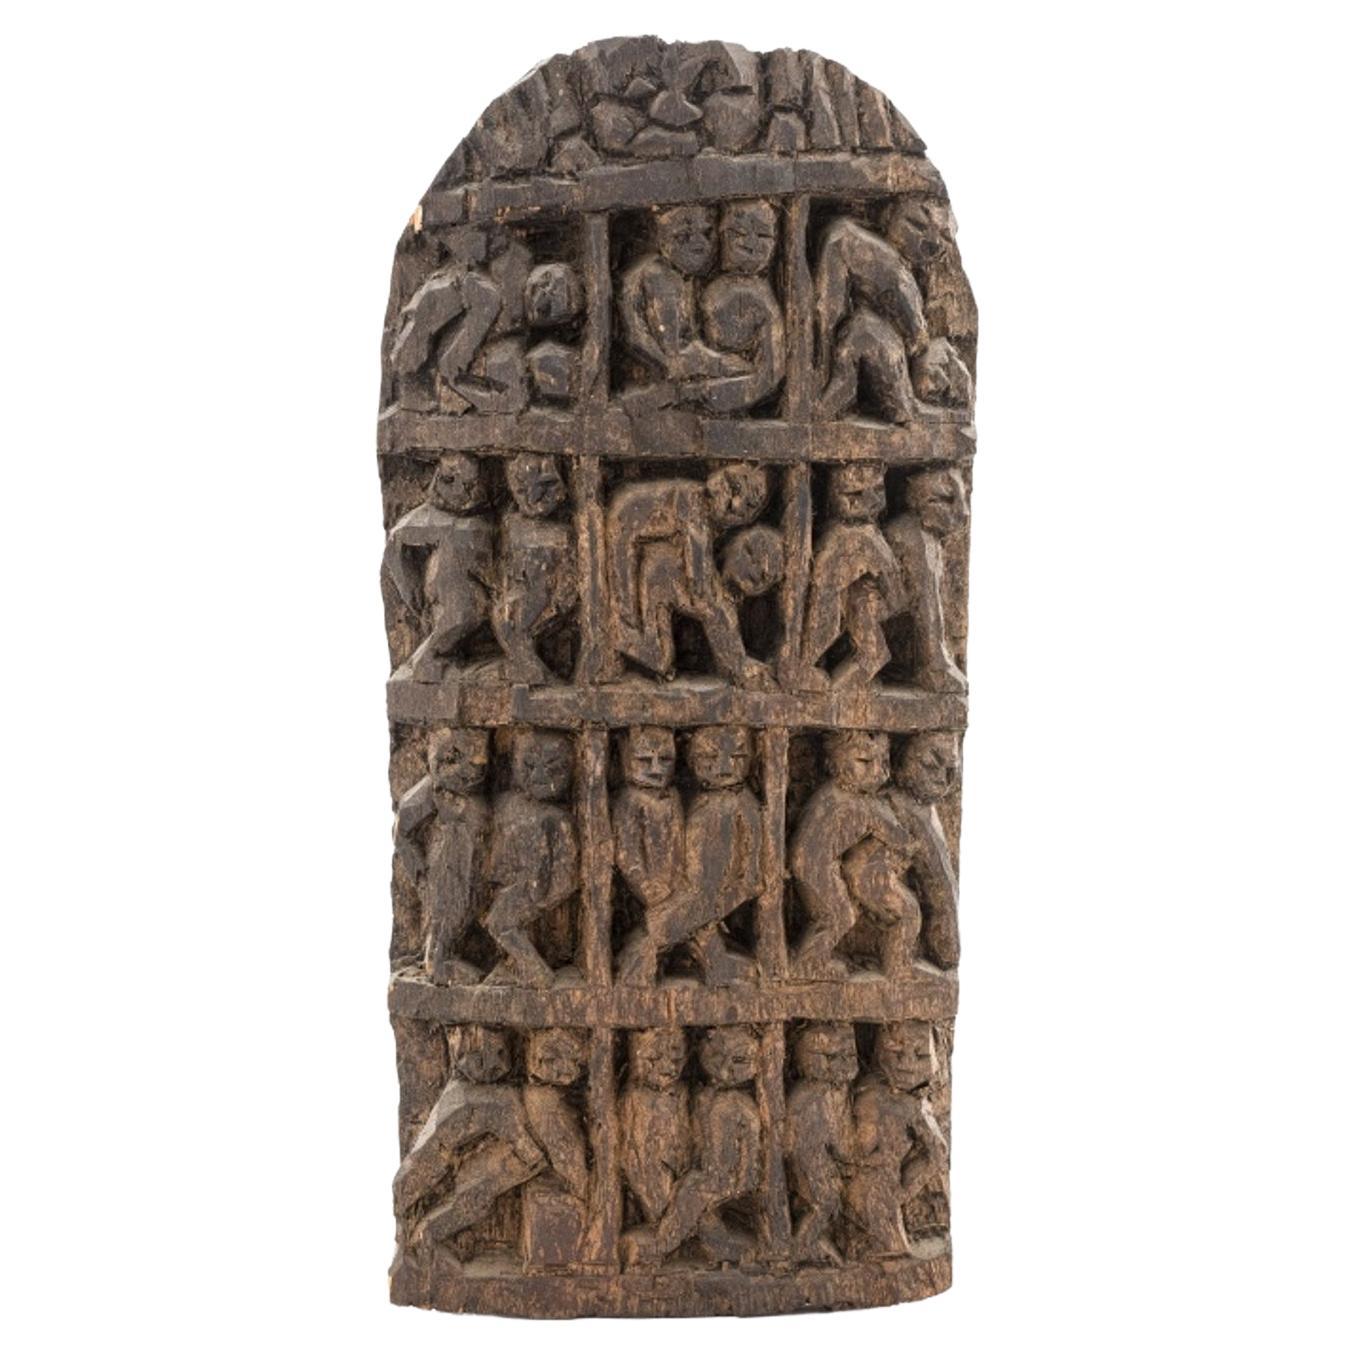 Indian Erotic Wood Carving Plaque